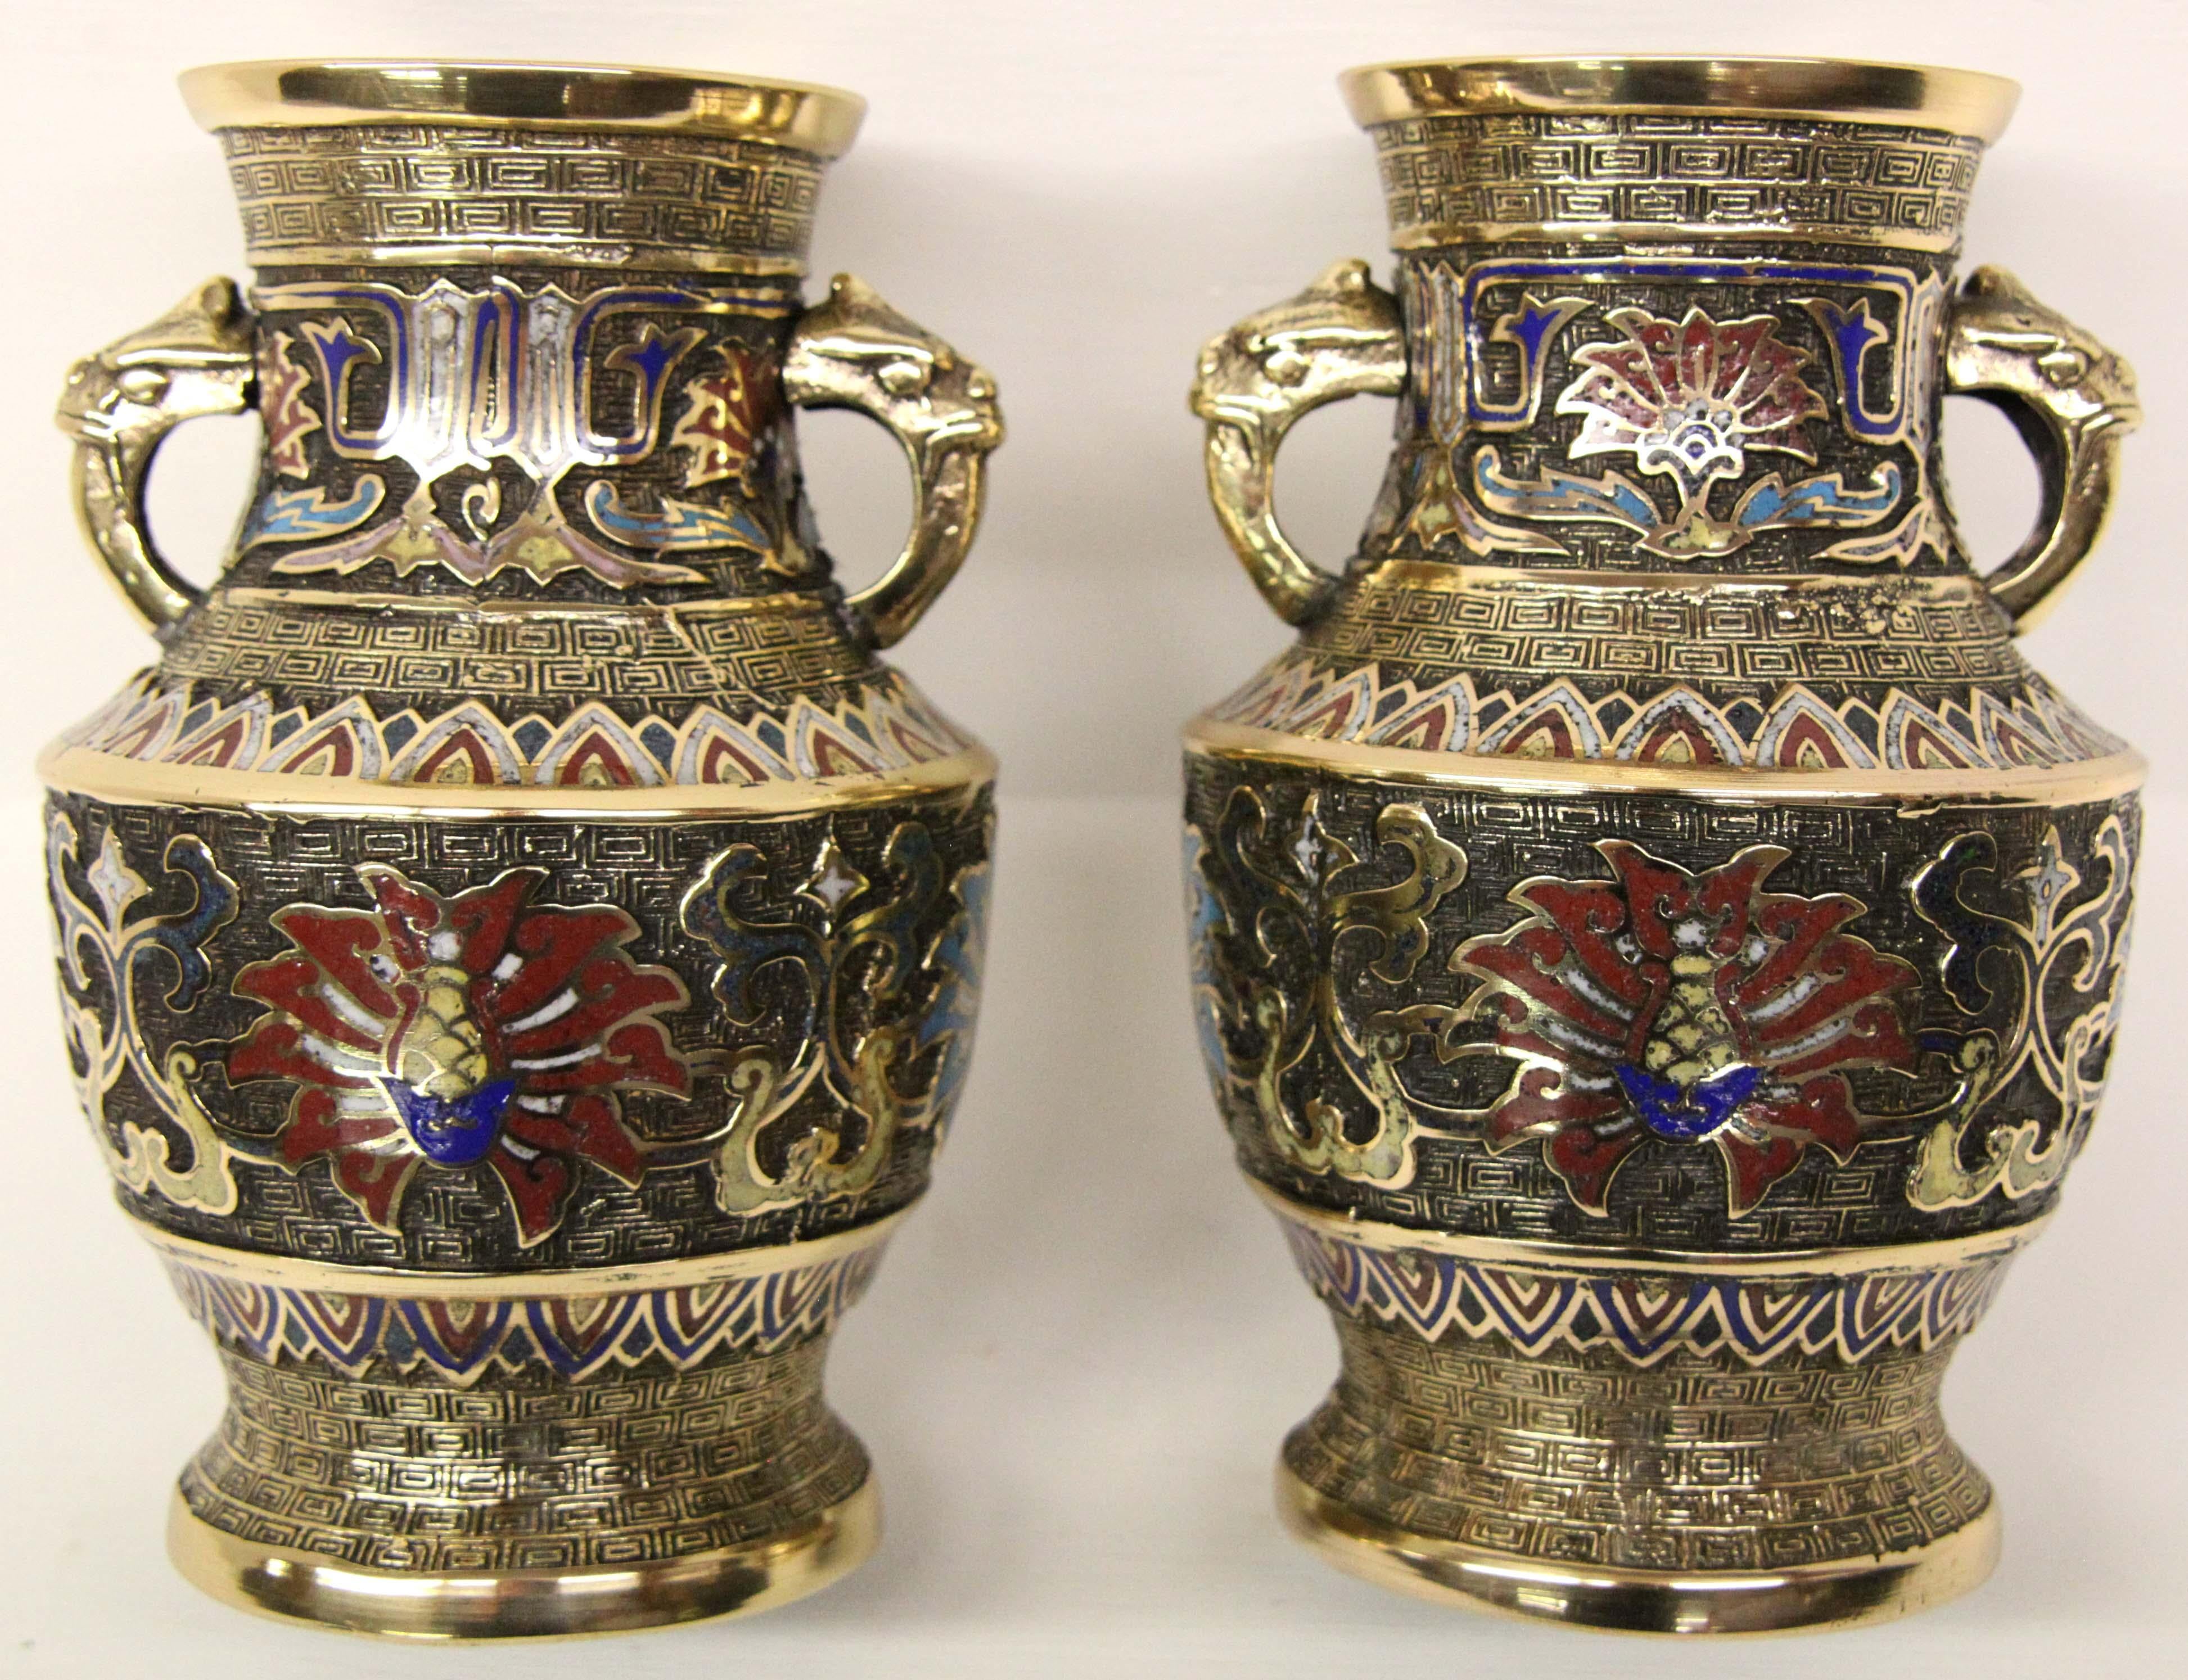 Pair of Japanese brass and enamel Champleve vases, with handles on either side, red and blue enamel inset in different designs.